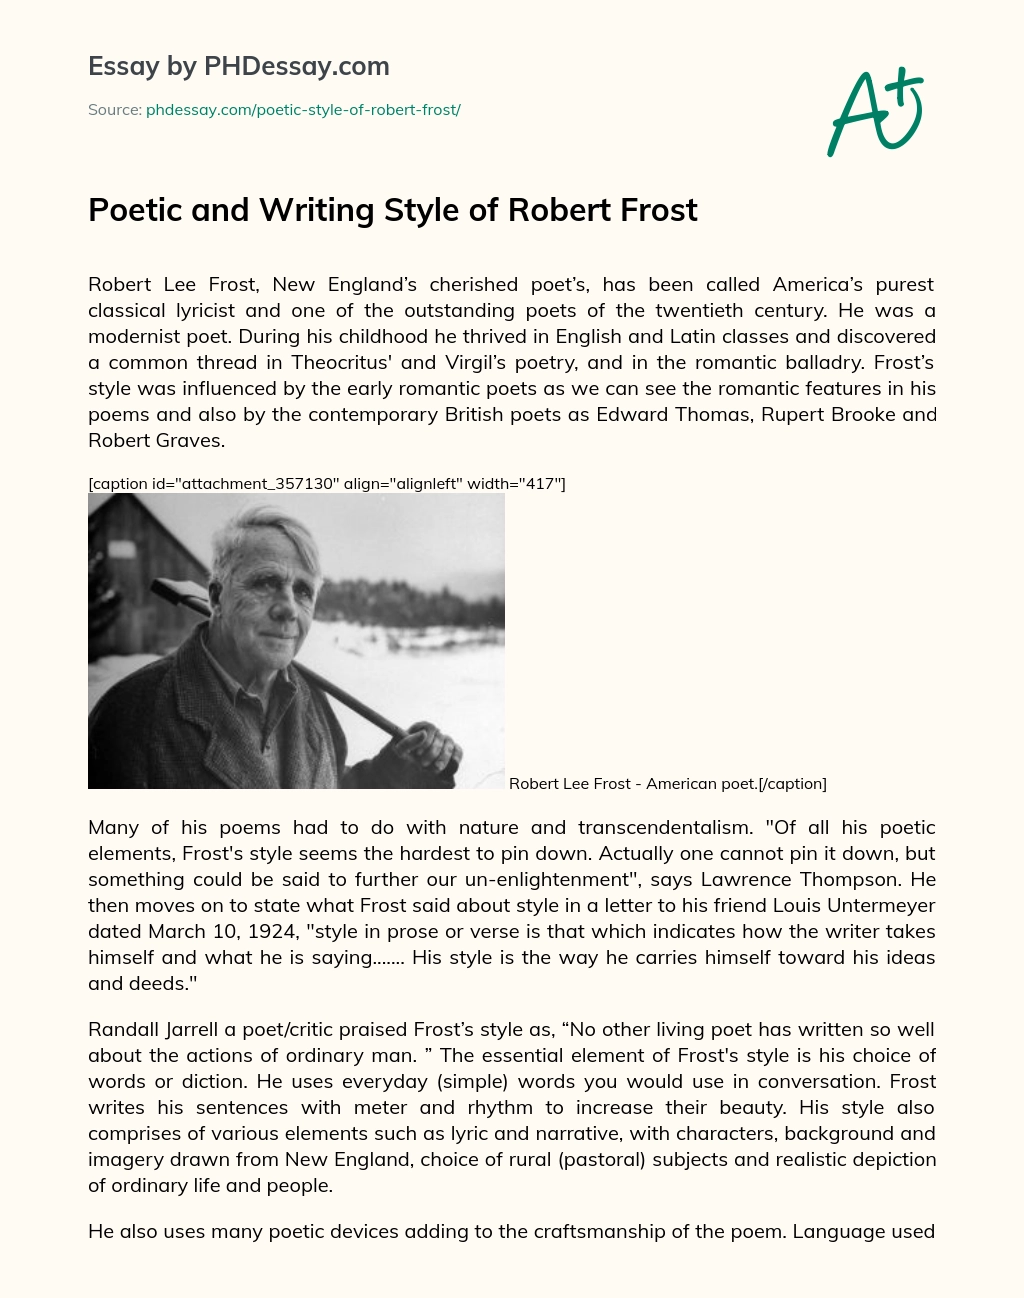 Poetic and Writing Style of Robert Frost essay